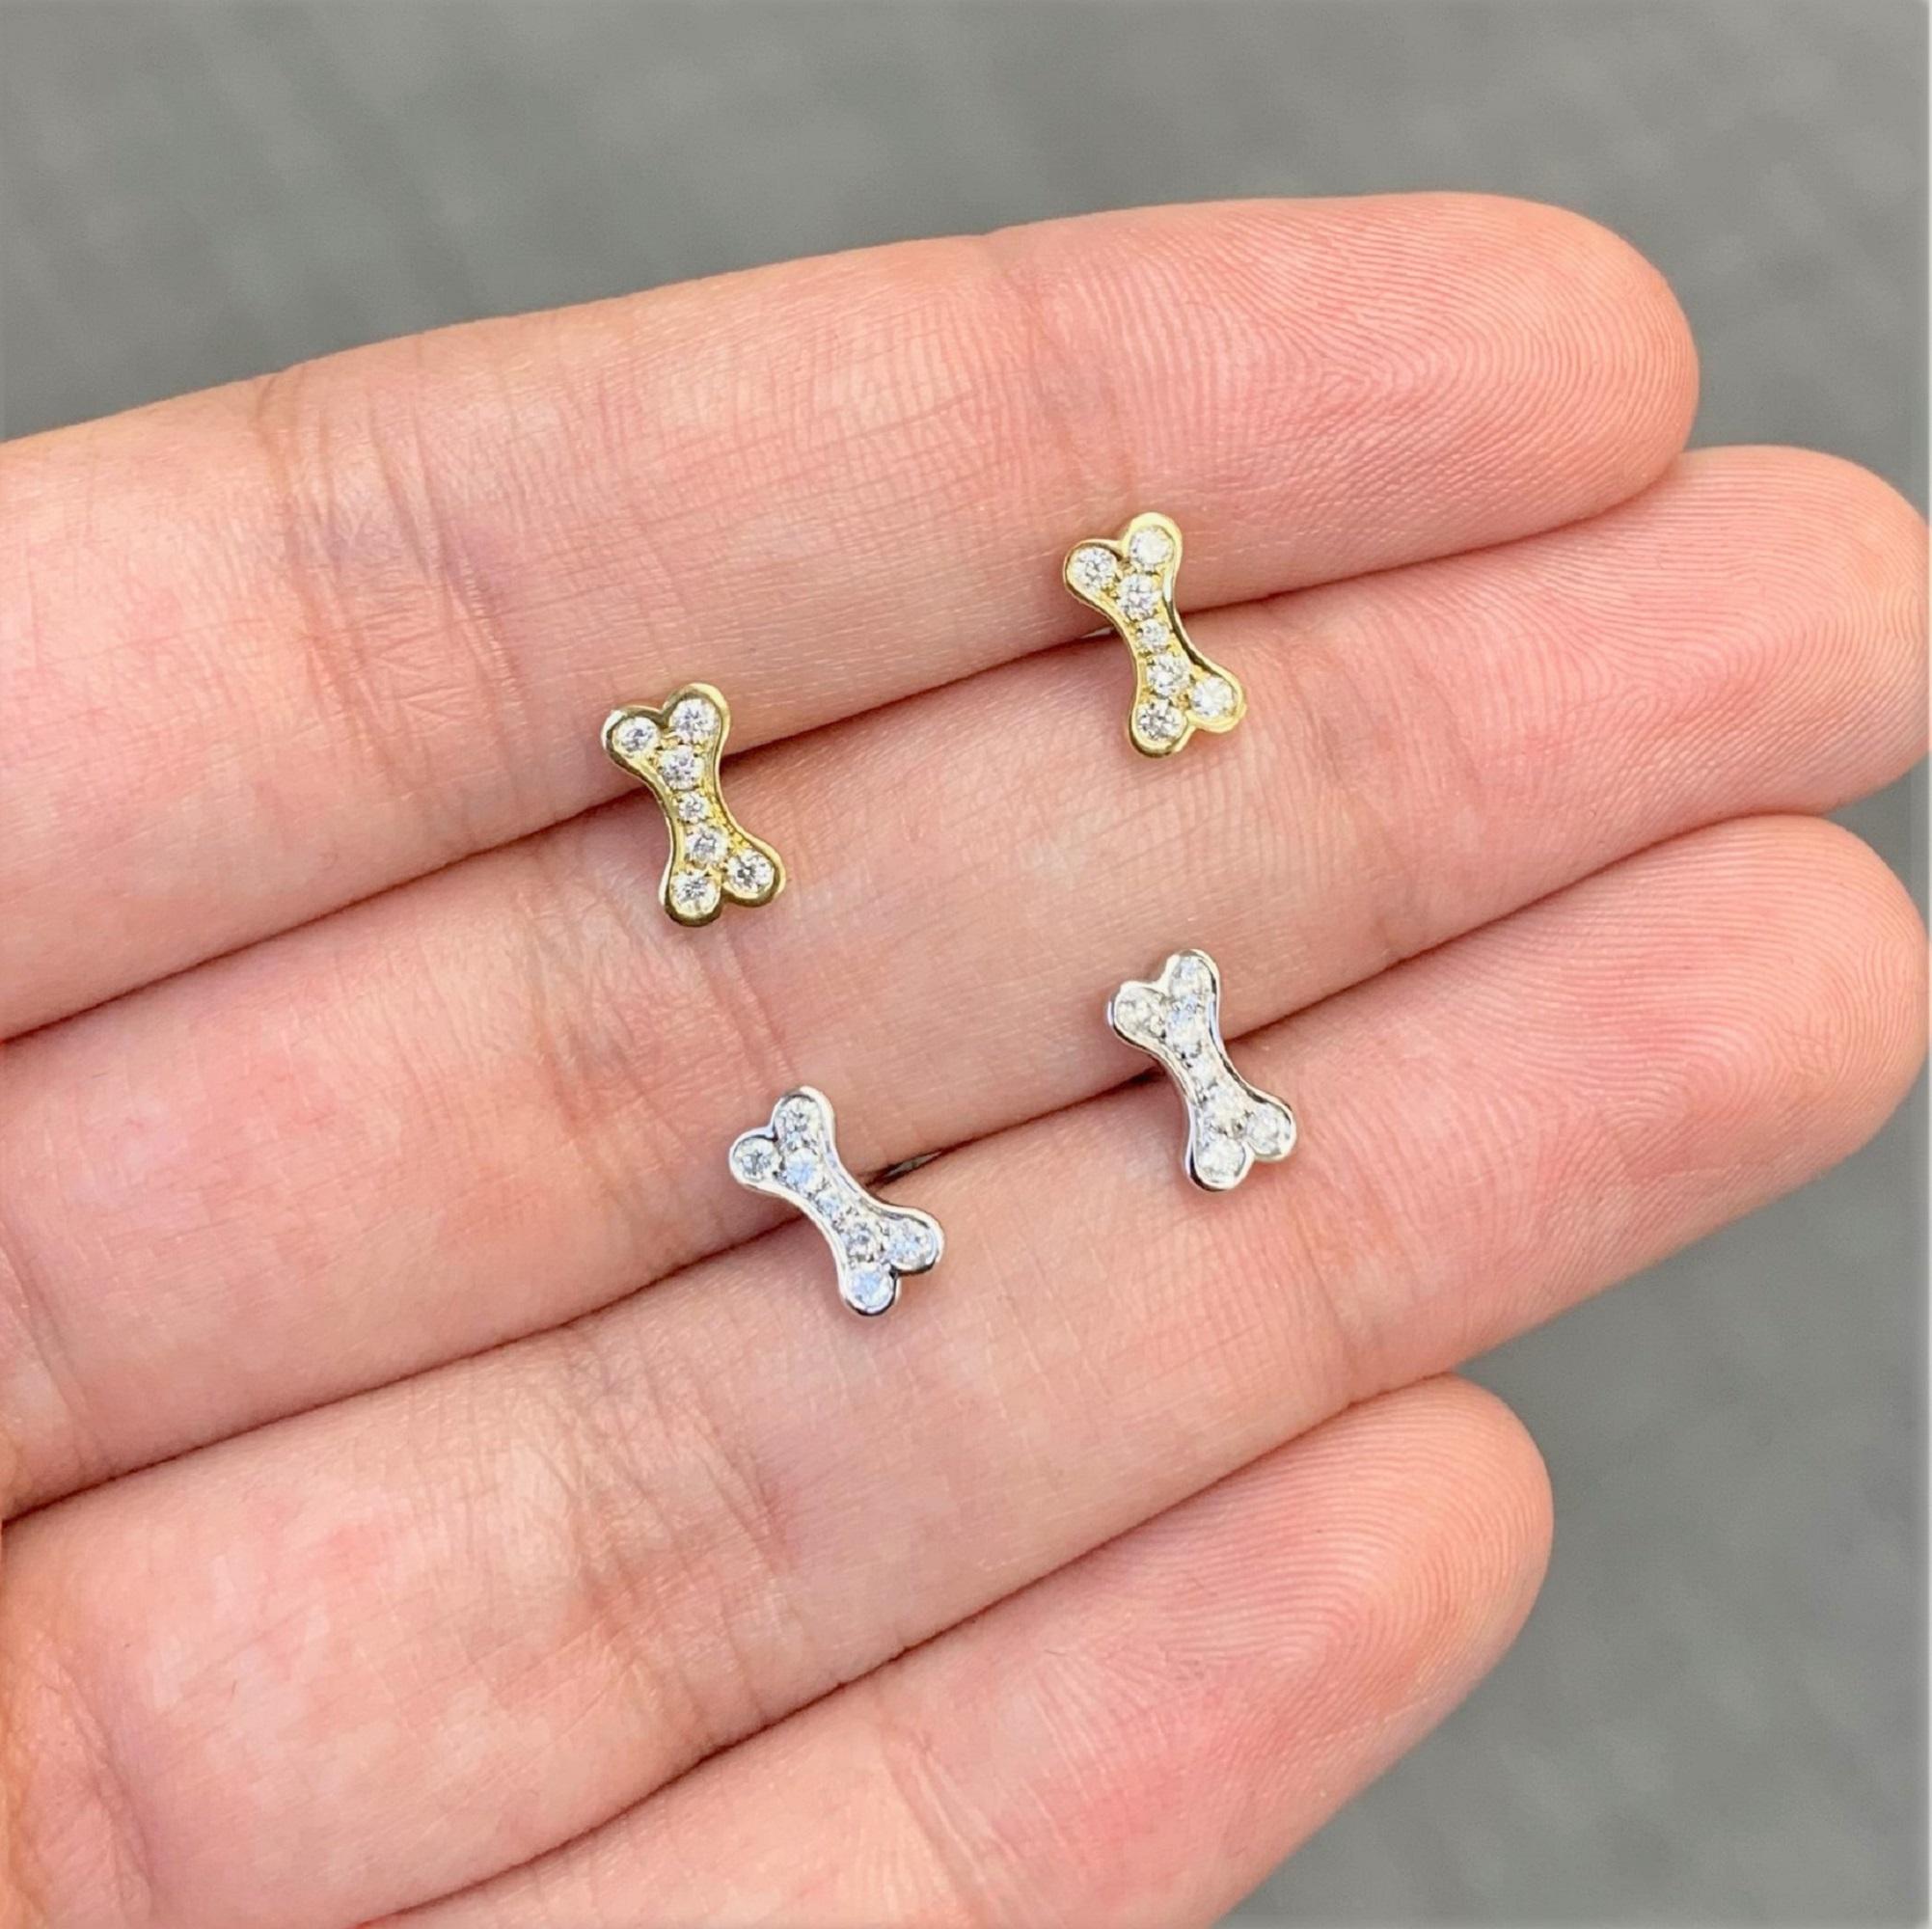 Quality Diamond Earrings: Made from real 14k gold and glittering Diamonds on a dog bone design approximately 0.15 ct. Certified diamonds,  with a color and clarity of GH-SI. Butterfly Pushback Closure
 Surprise Your Loved One with Our Dog Bone